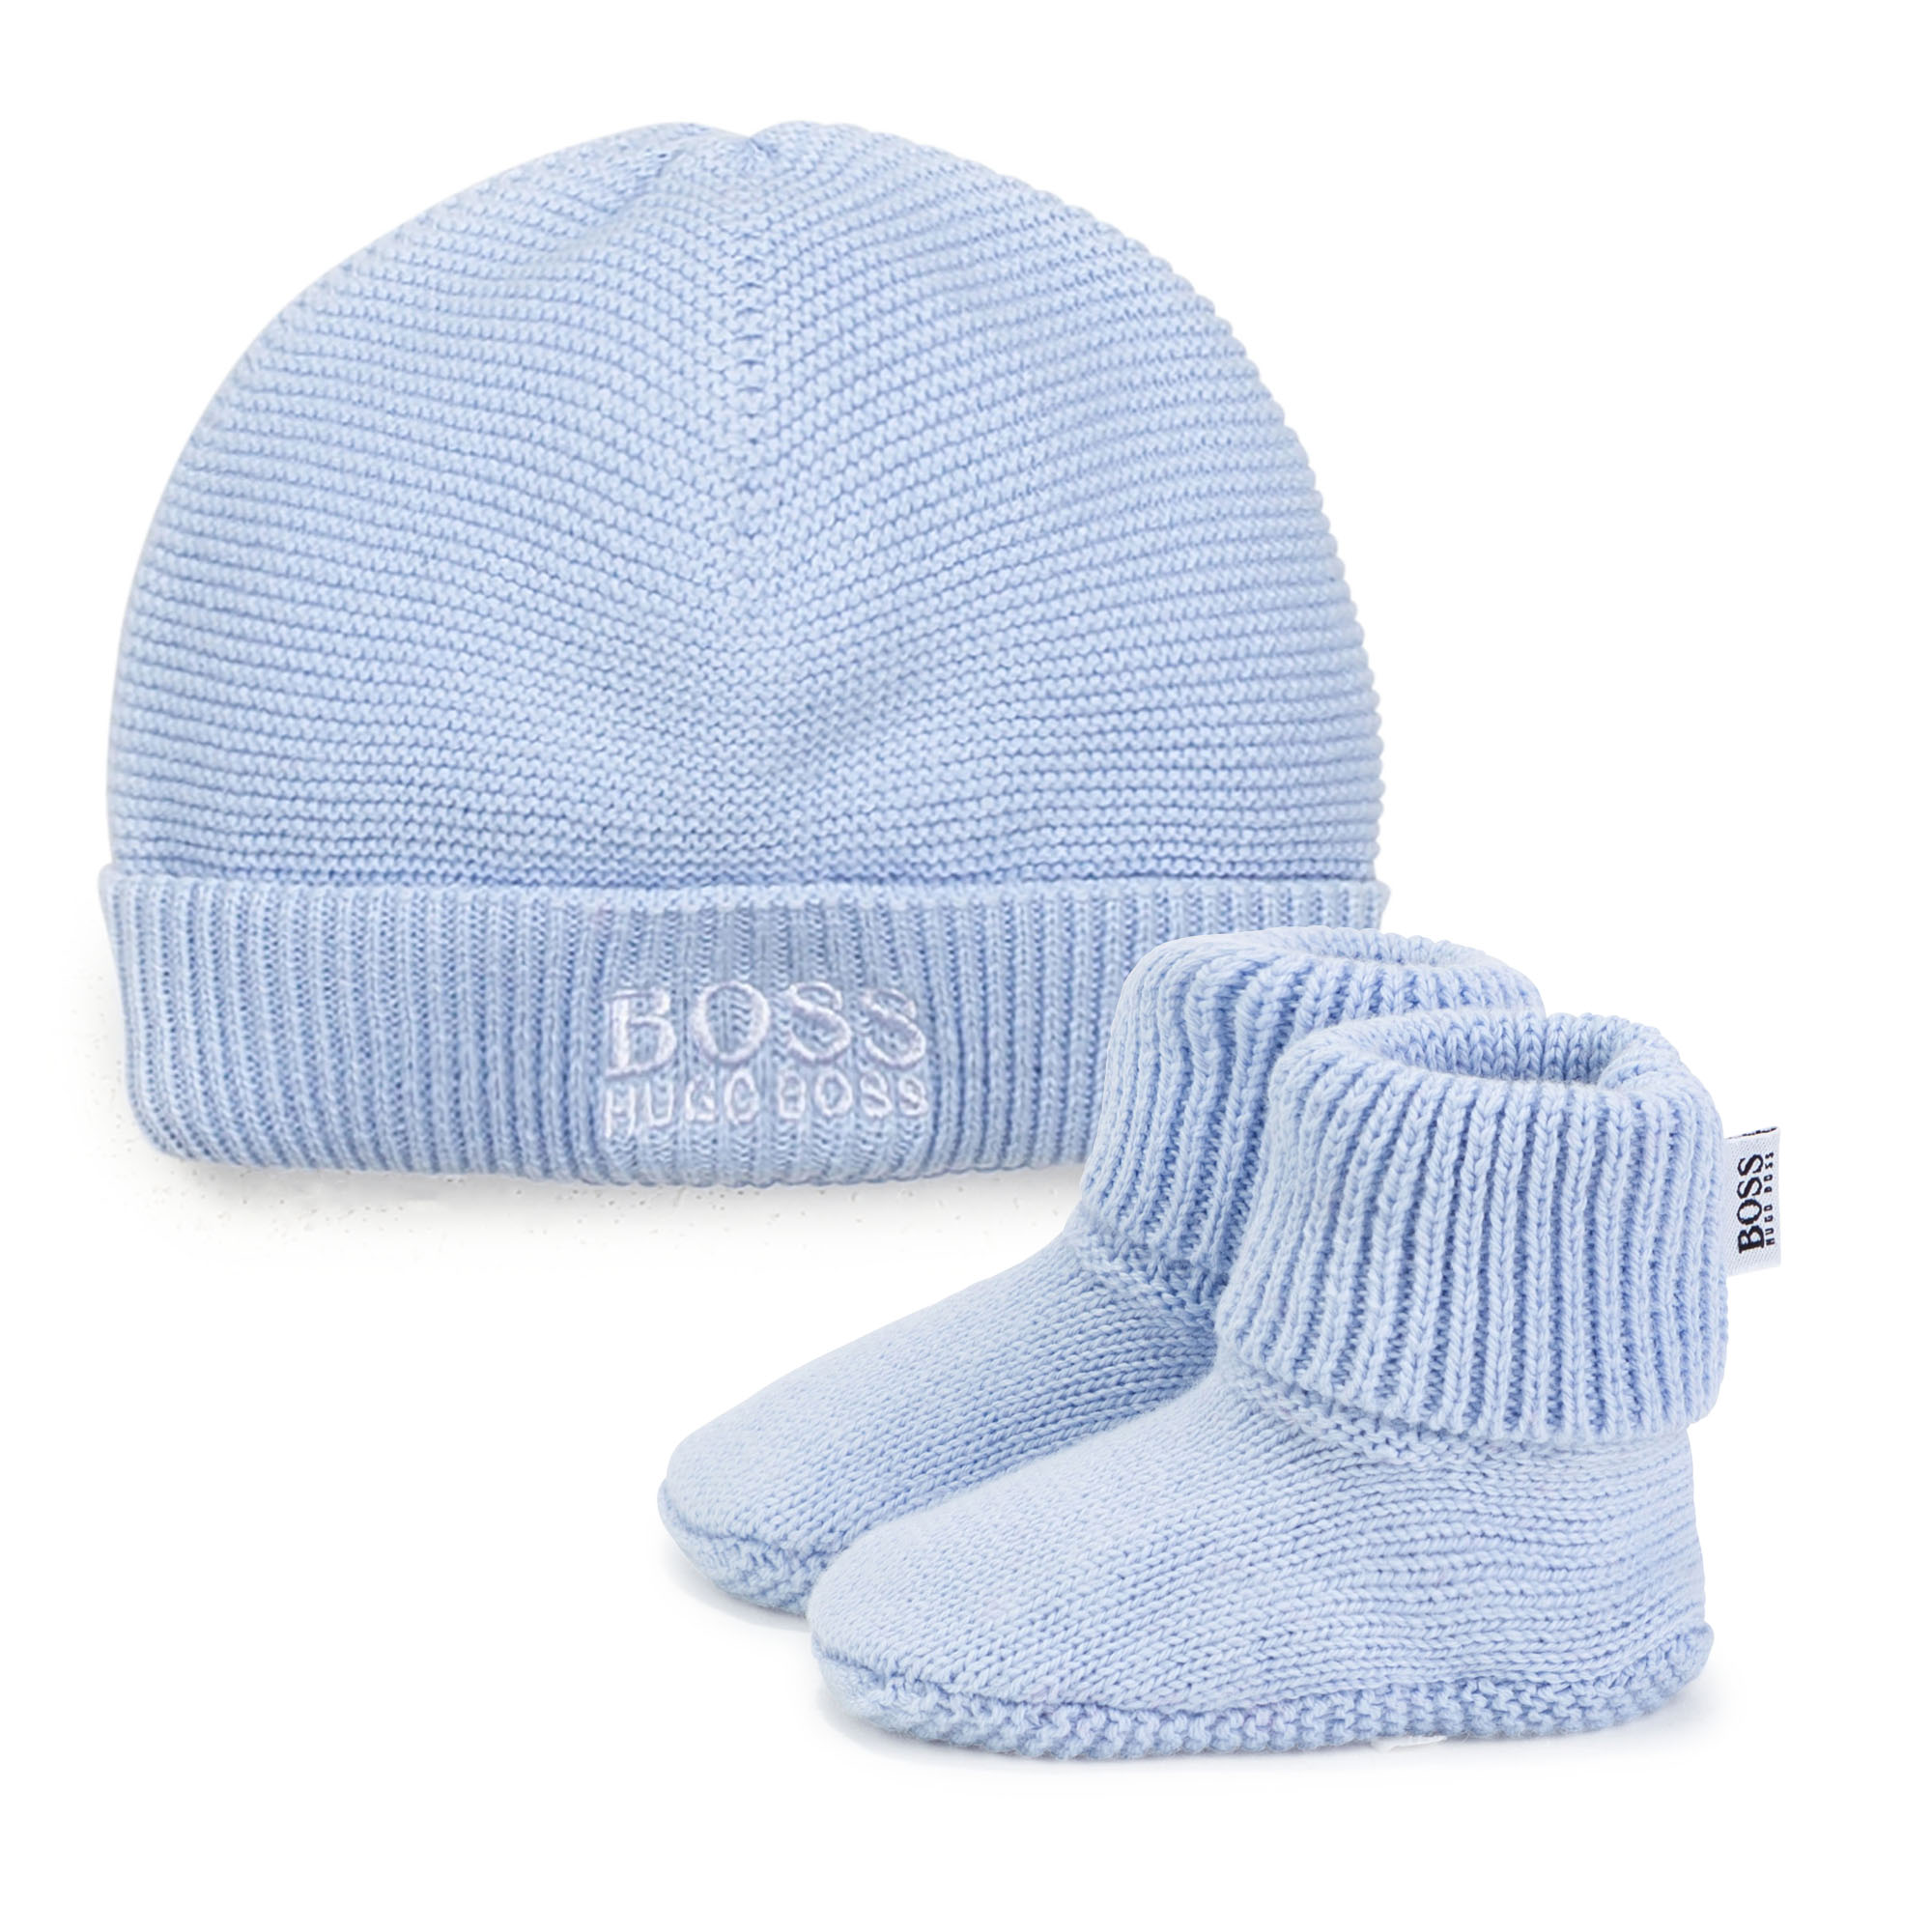 Matching hat and booties set BOSS for UNISEX